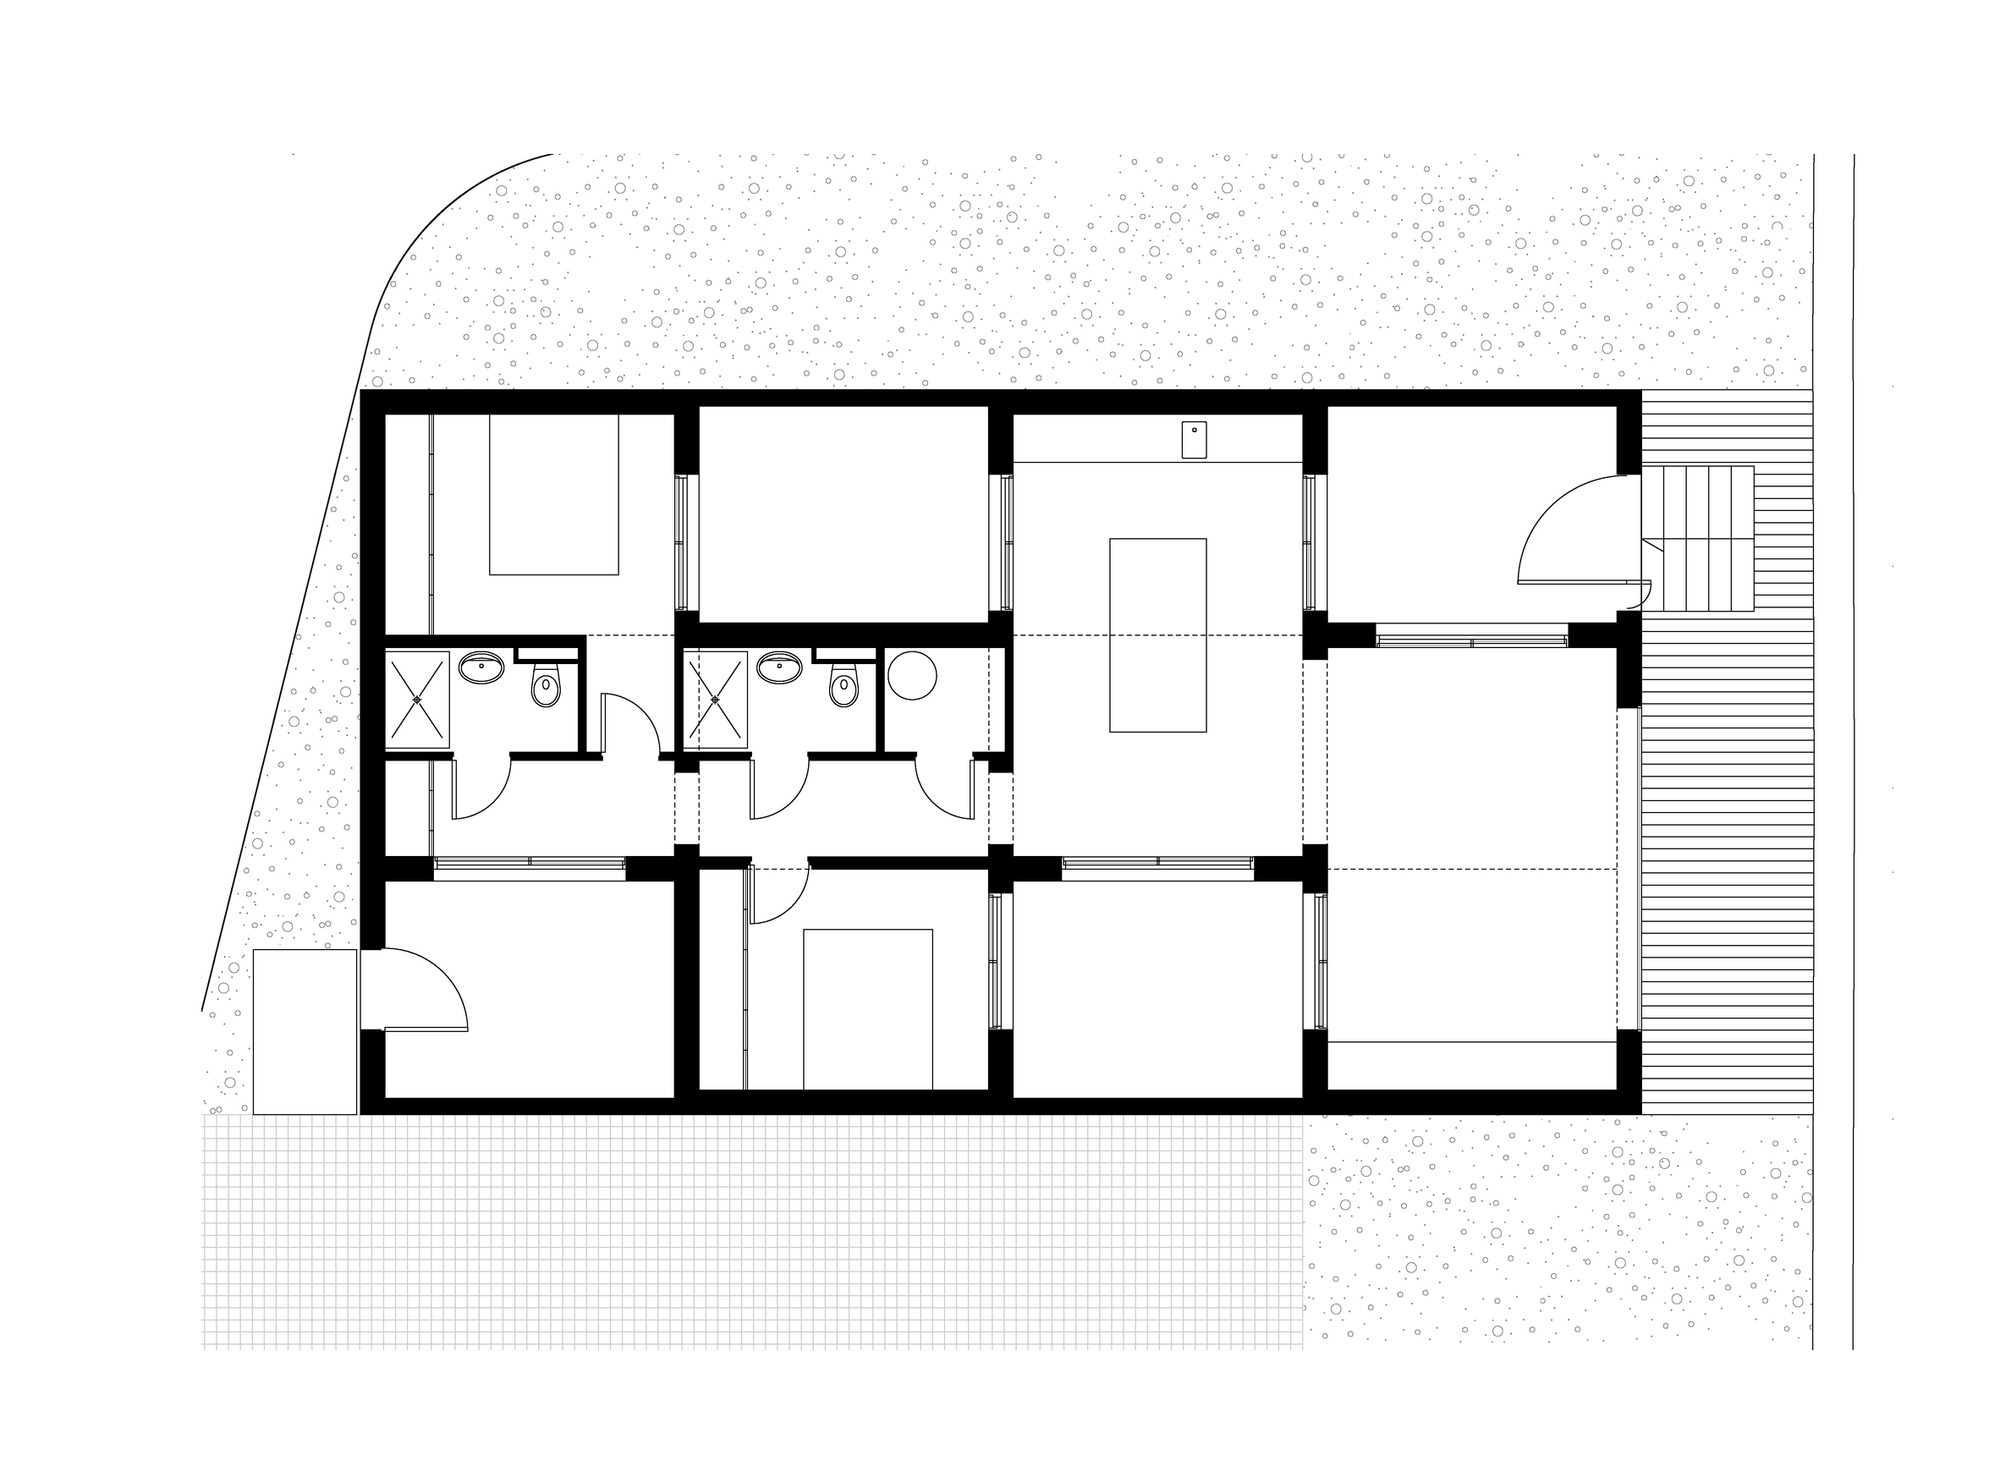 Gallery of House Plans Under 100 Square Meters 30 Useful